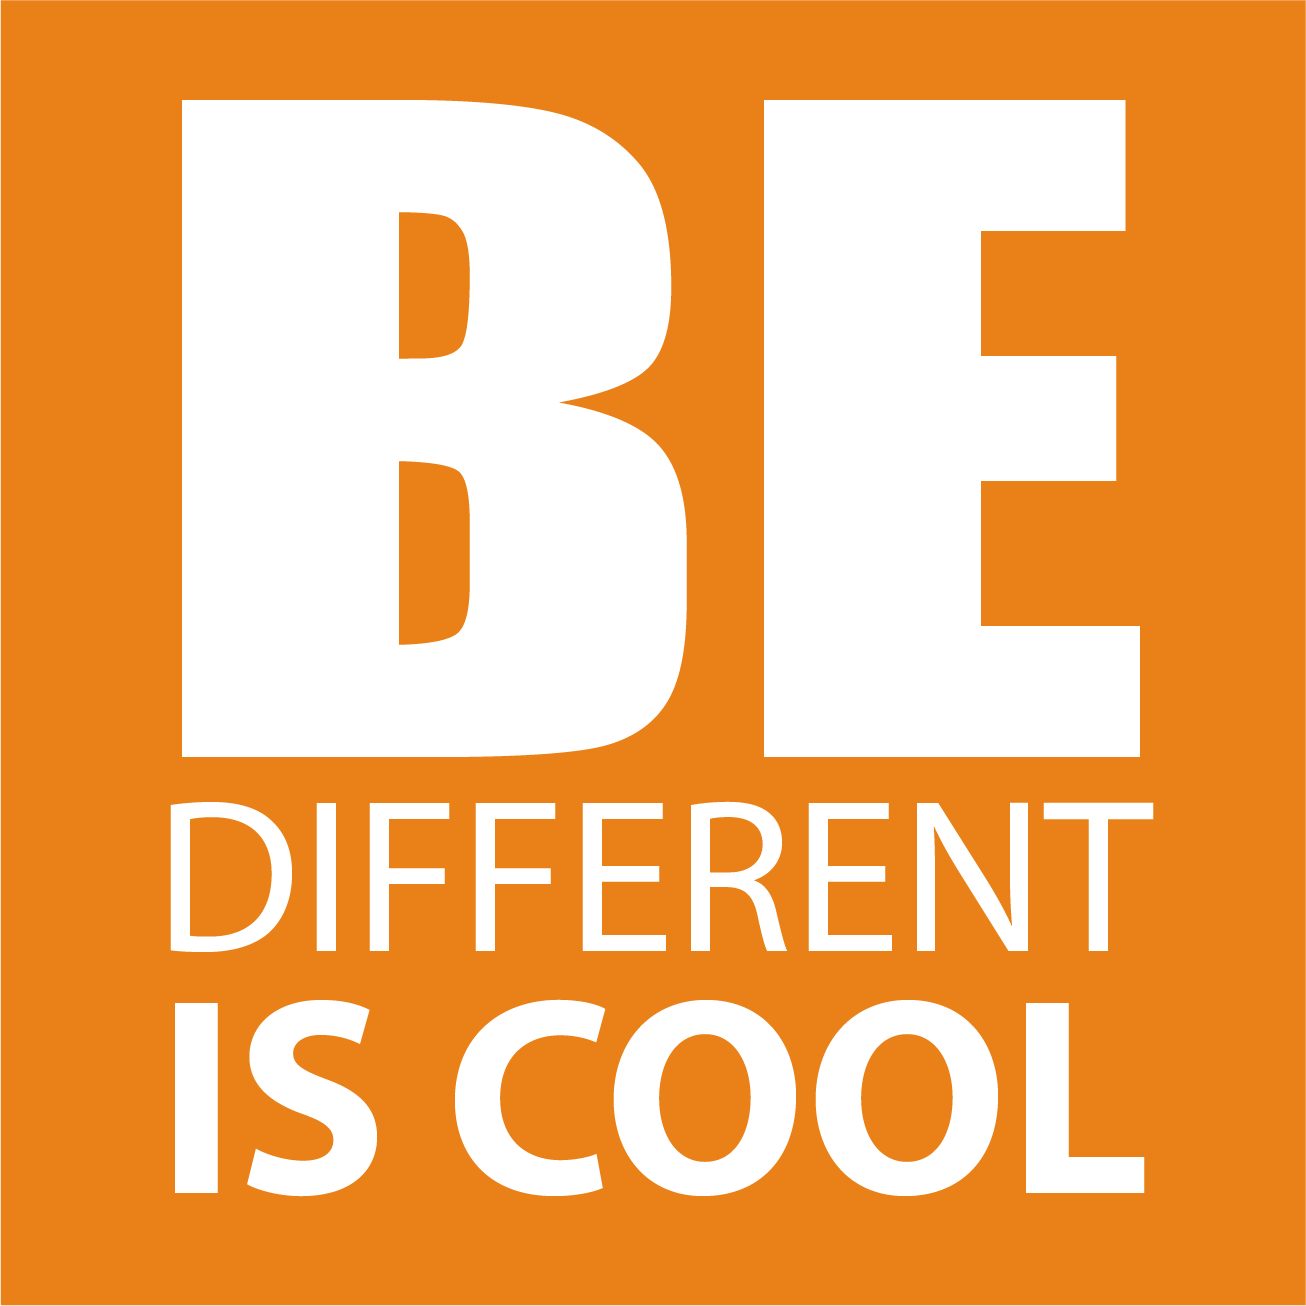 Be different is cool